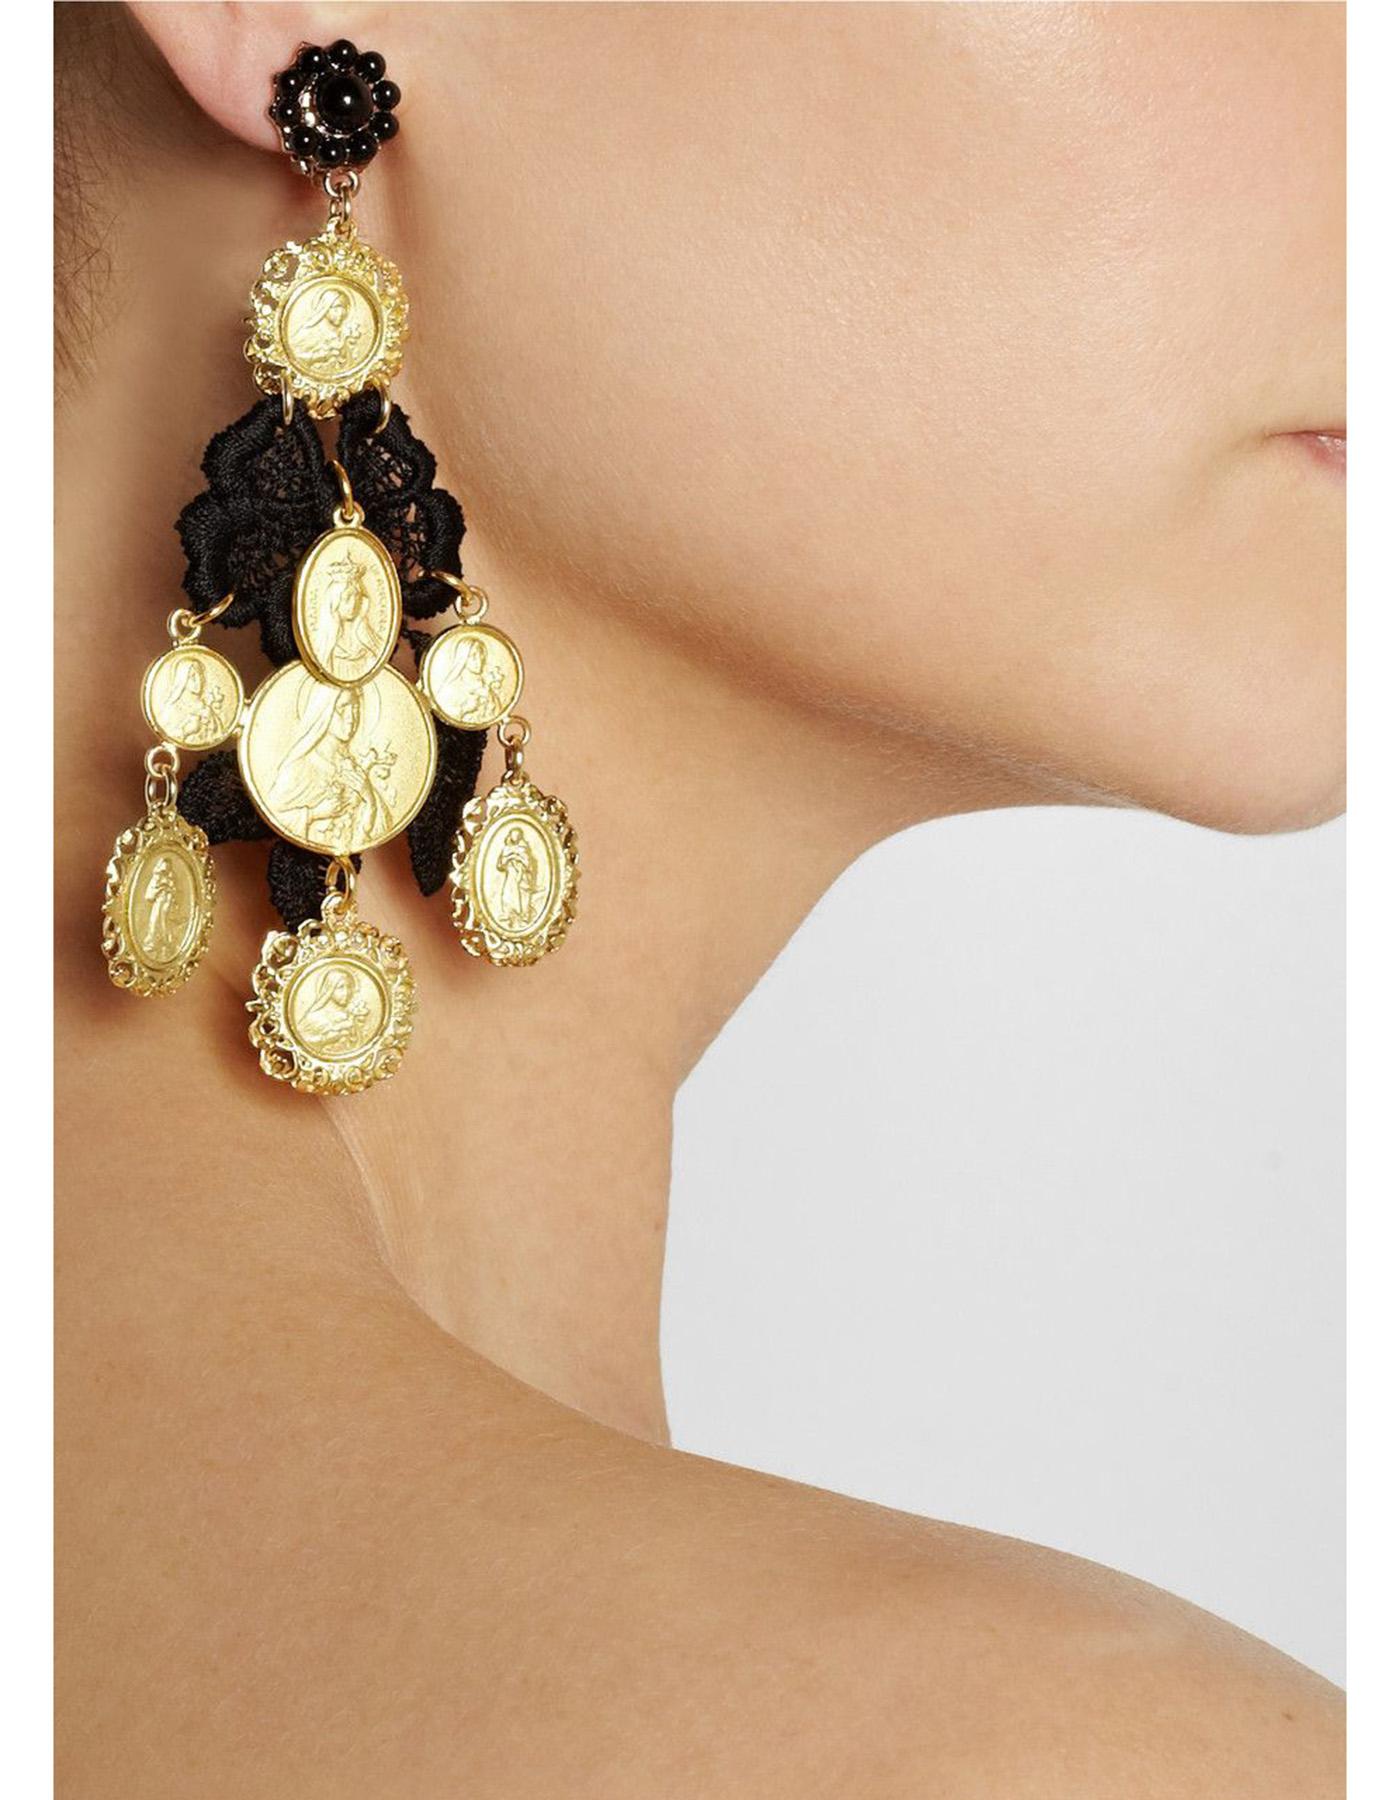 Dolce & Gabbana Gold-Plated Resin & Macrame Lace Chandelier Earrings

Color: Gold, black
Materials: Metal, lace, resin
Closure: Clip on
Stamp: Dolce & Gabbana
Overall Condition: Excellent pre-owned condition

Measurements: 
Drop: 4